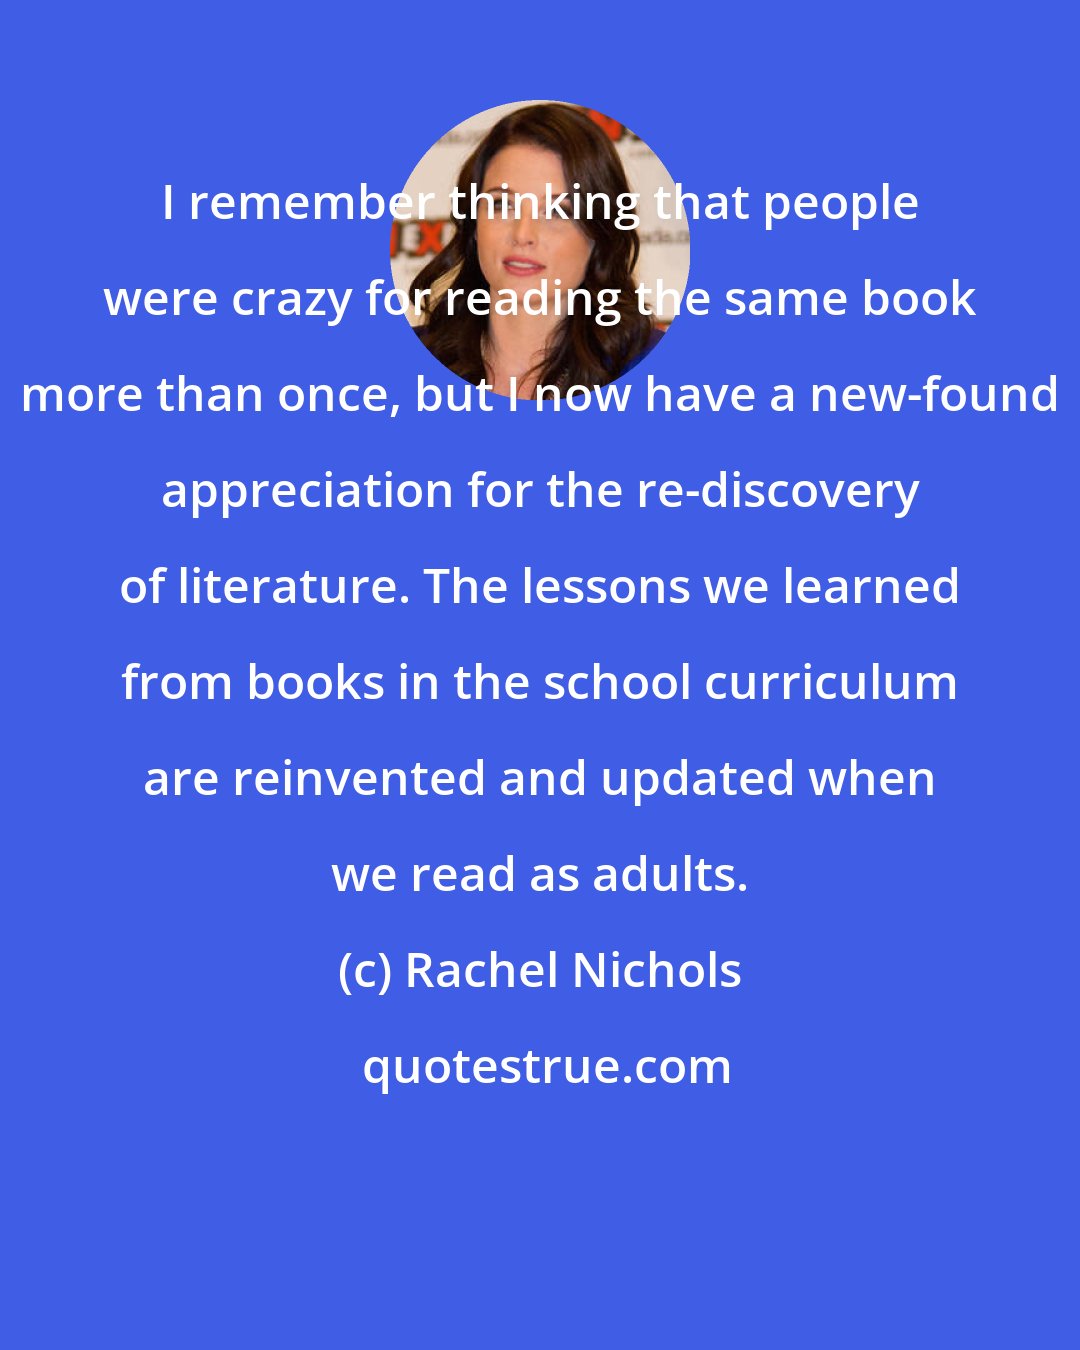 Rachel Nichols: I remember thinking that people were crazy for reading the same book more than once, but I now have a new-found appreciation for the re-discovery of literature. The lessons we learned from books in the school curriculum are reinvented and updated when we read as adults.